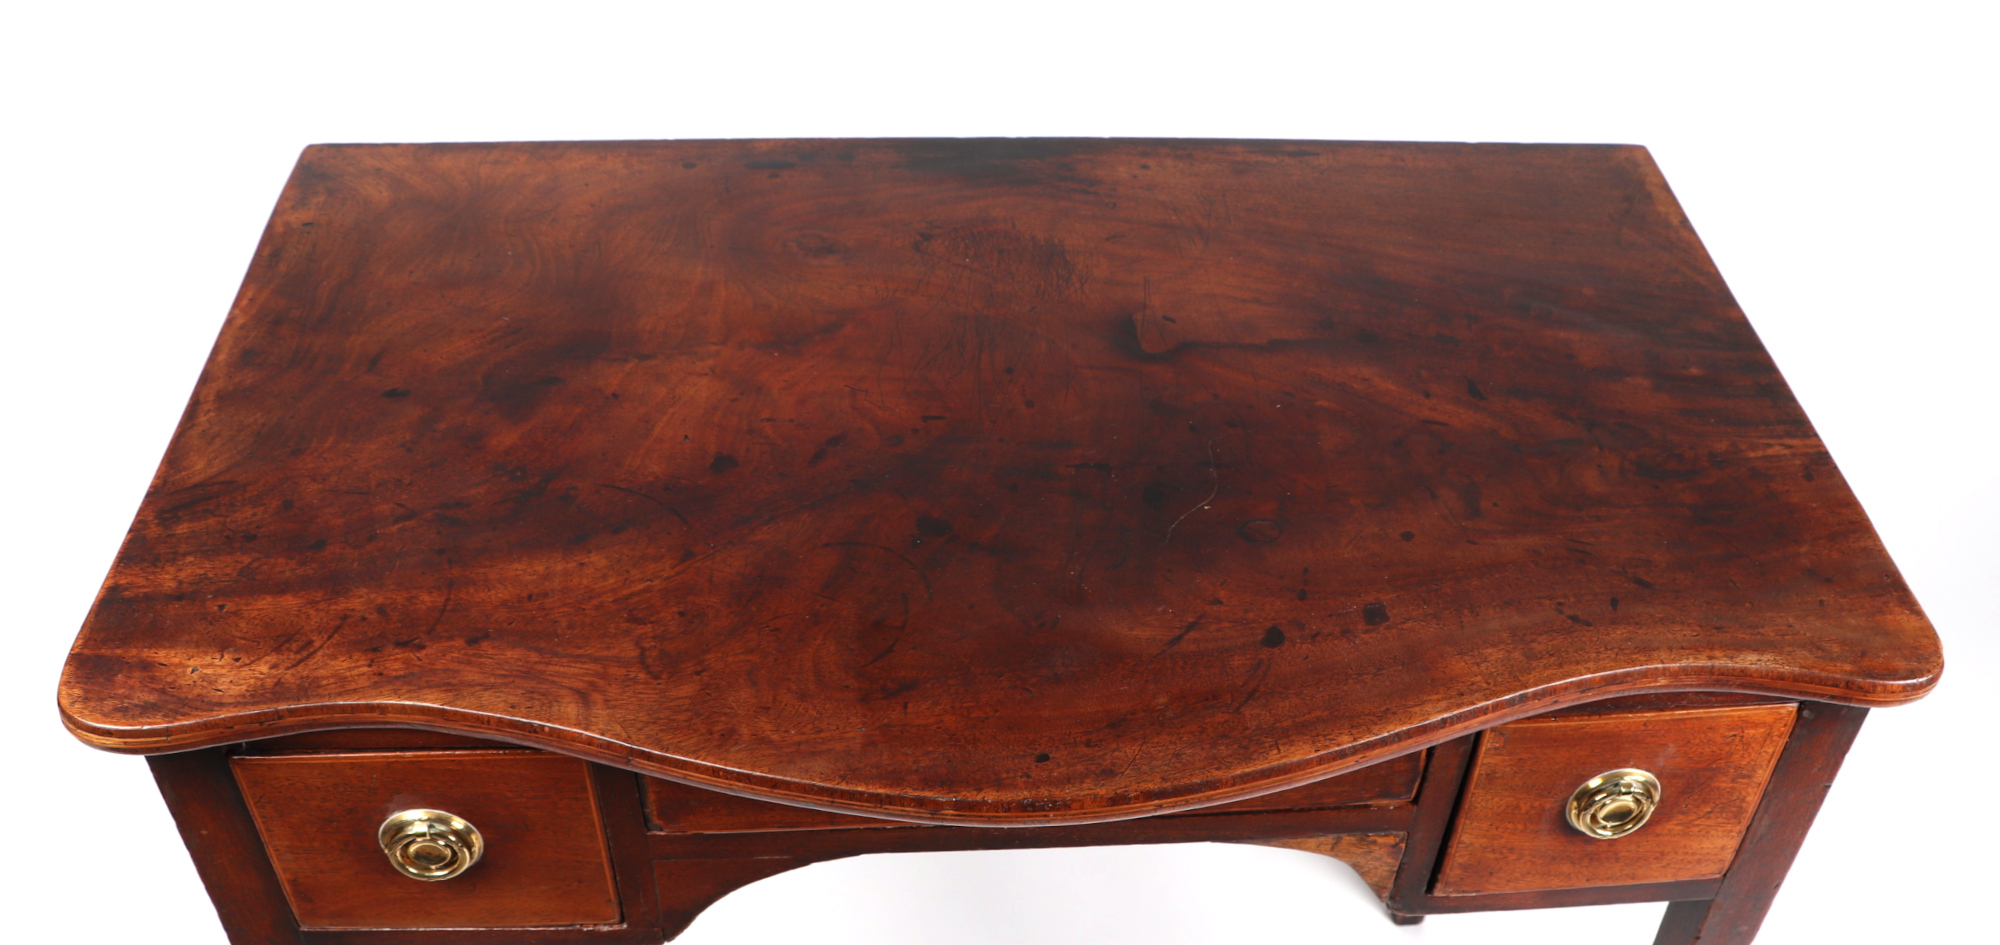 A 19th century mahogany serpentine front side table, having an arrangement of three drawers on - Image 2 of 2